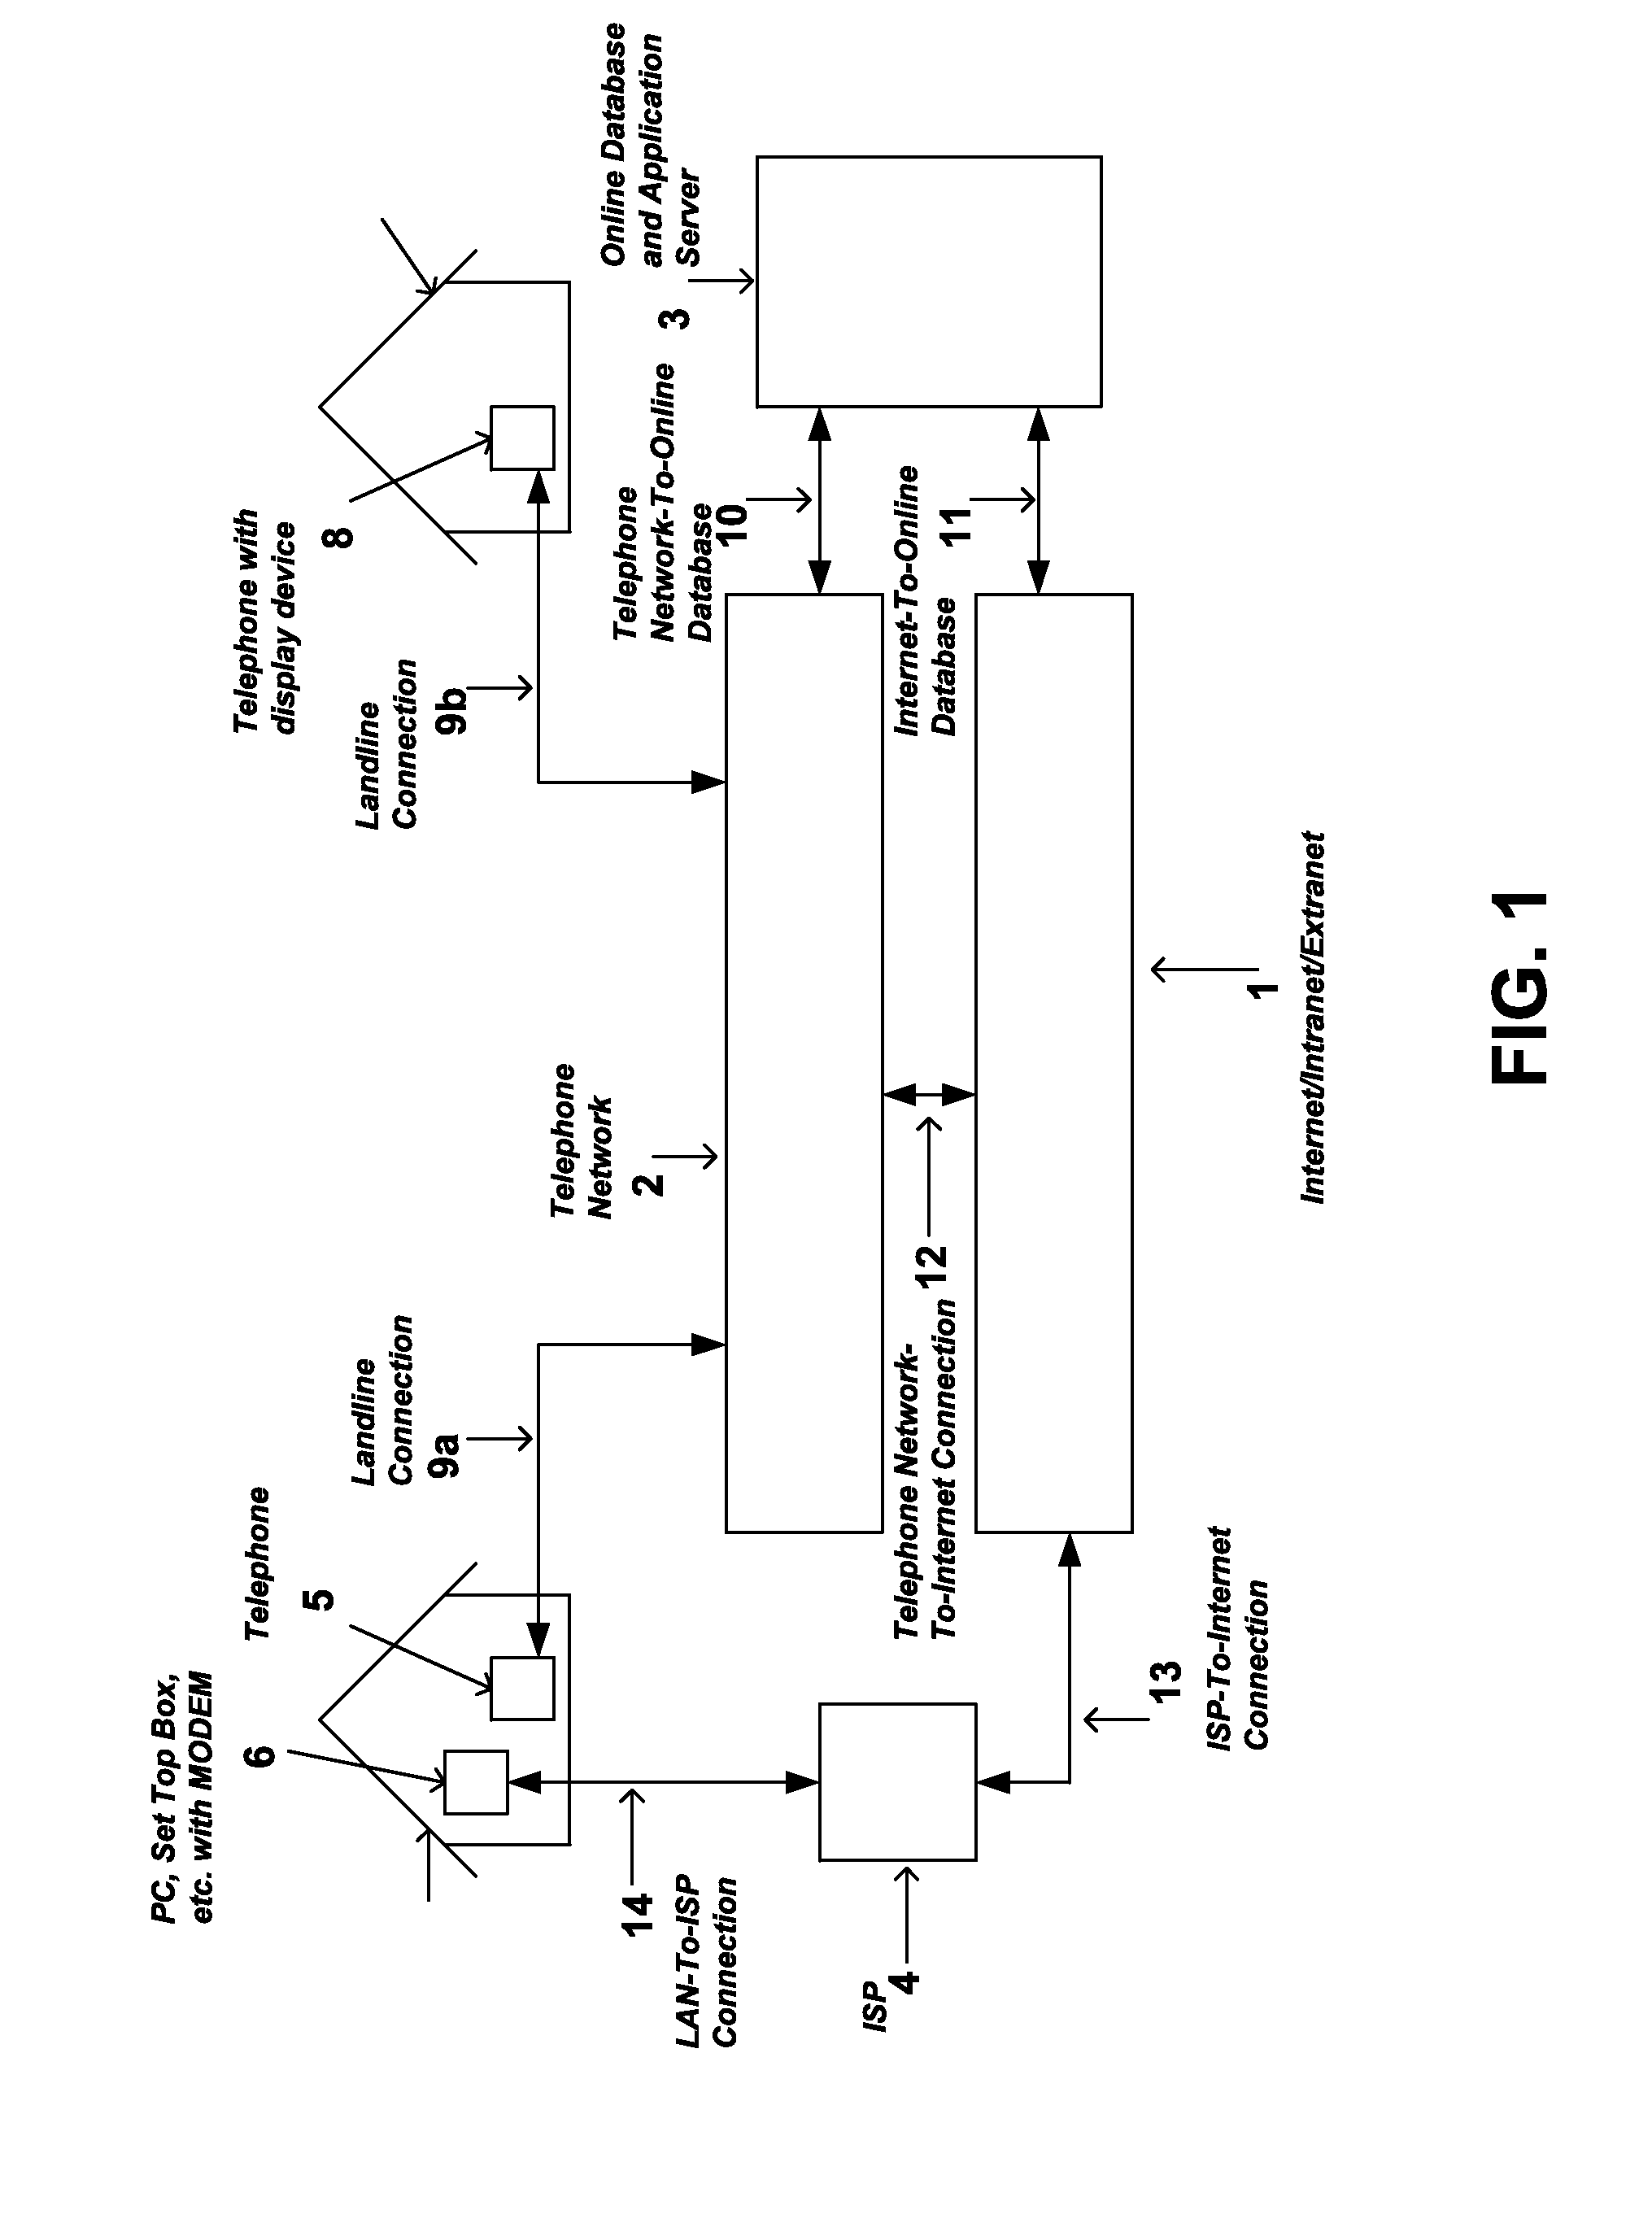 System and method for providing routing, mapping, and relative position information to users of a communication network